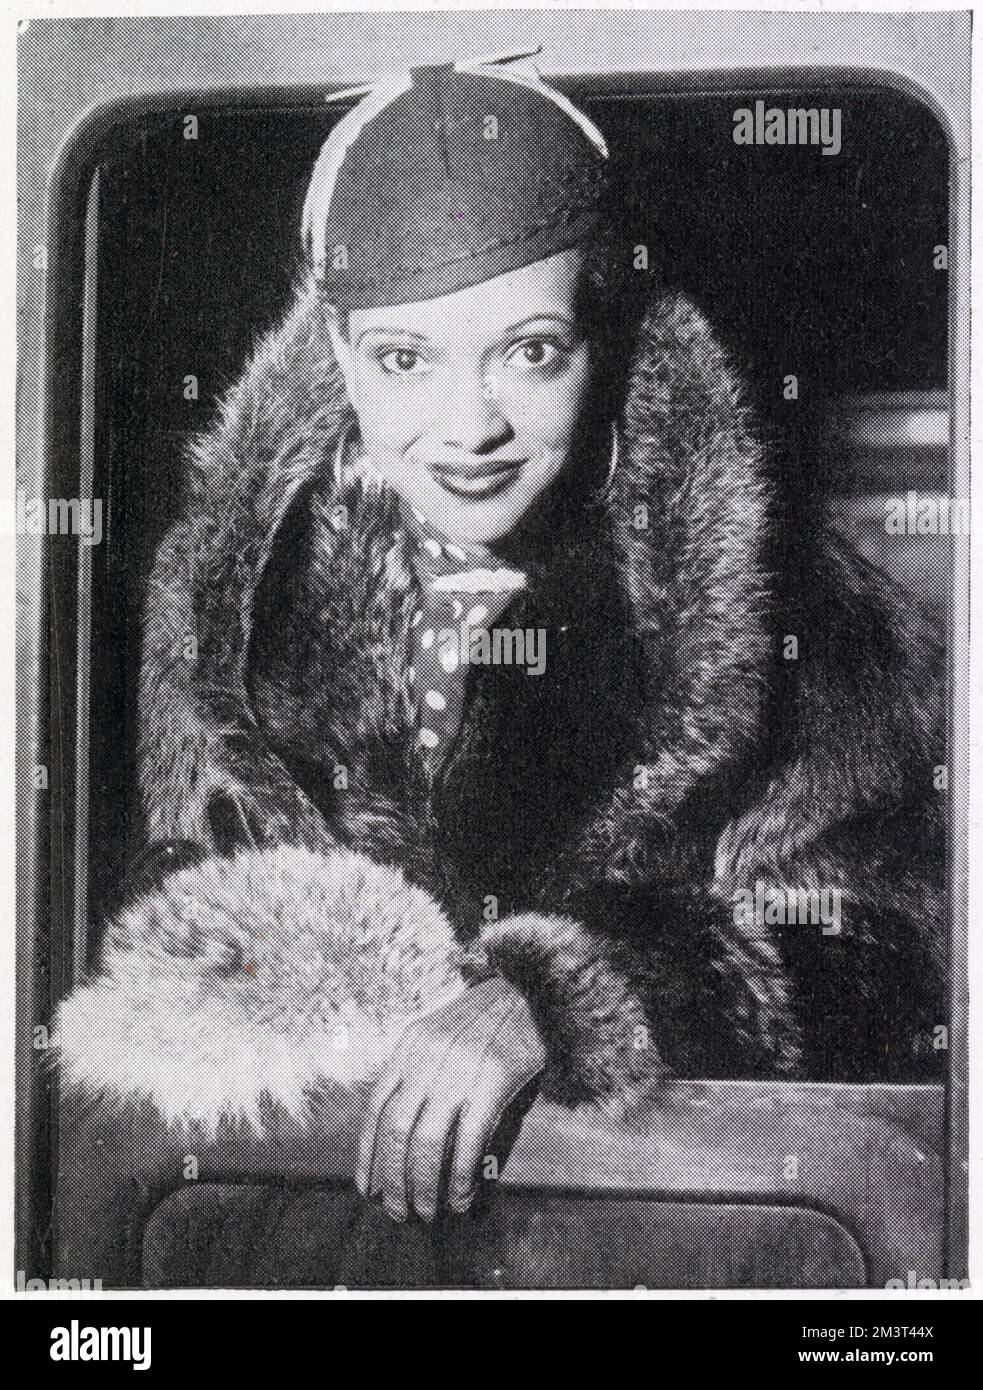 Nine Mae McKinney (incorrectly called May McKinney in The Sphere) pictured on her arrival at Victoria Station from Hollywood at the time she was playing at the Leicester Square Theatre.Nina Mae McKinney (1913-1967) was the first African American actress to star in a Hollywood film Hallelujah! (1929). In the 1930s she worked mostly in the UK in films and on stage. She was also a television pioneer with her own shows on pre-war BBC. Stock Photo